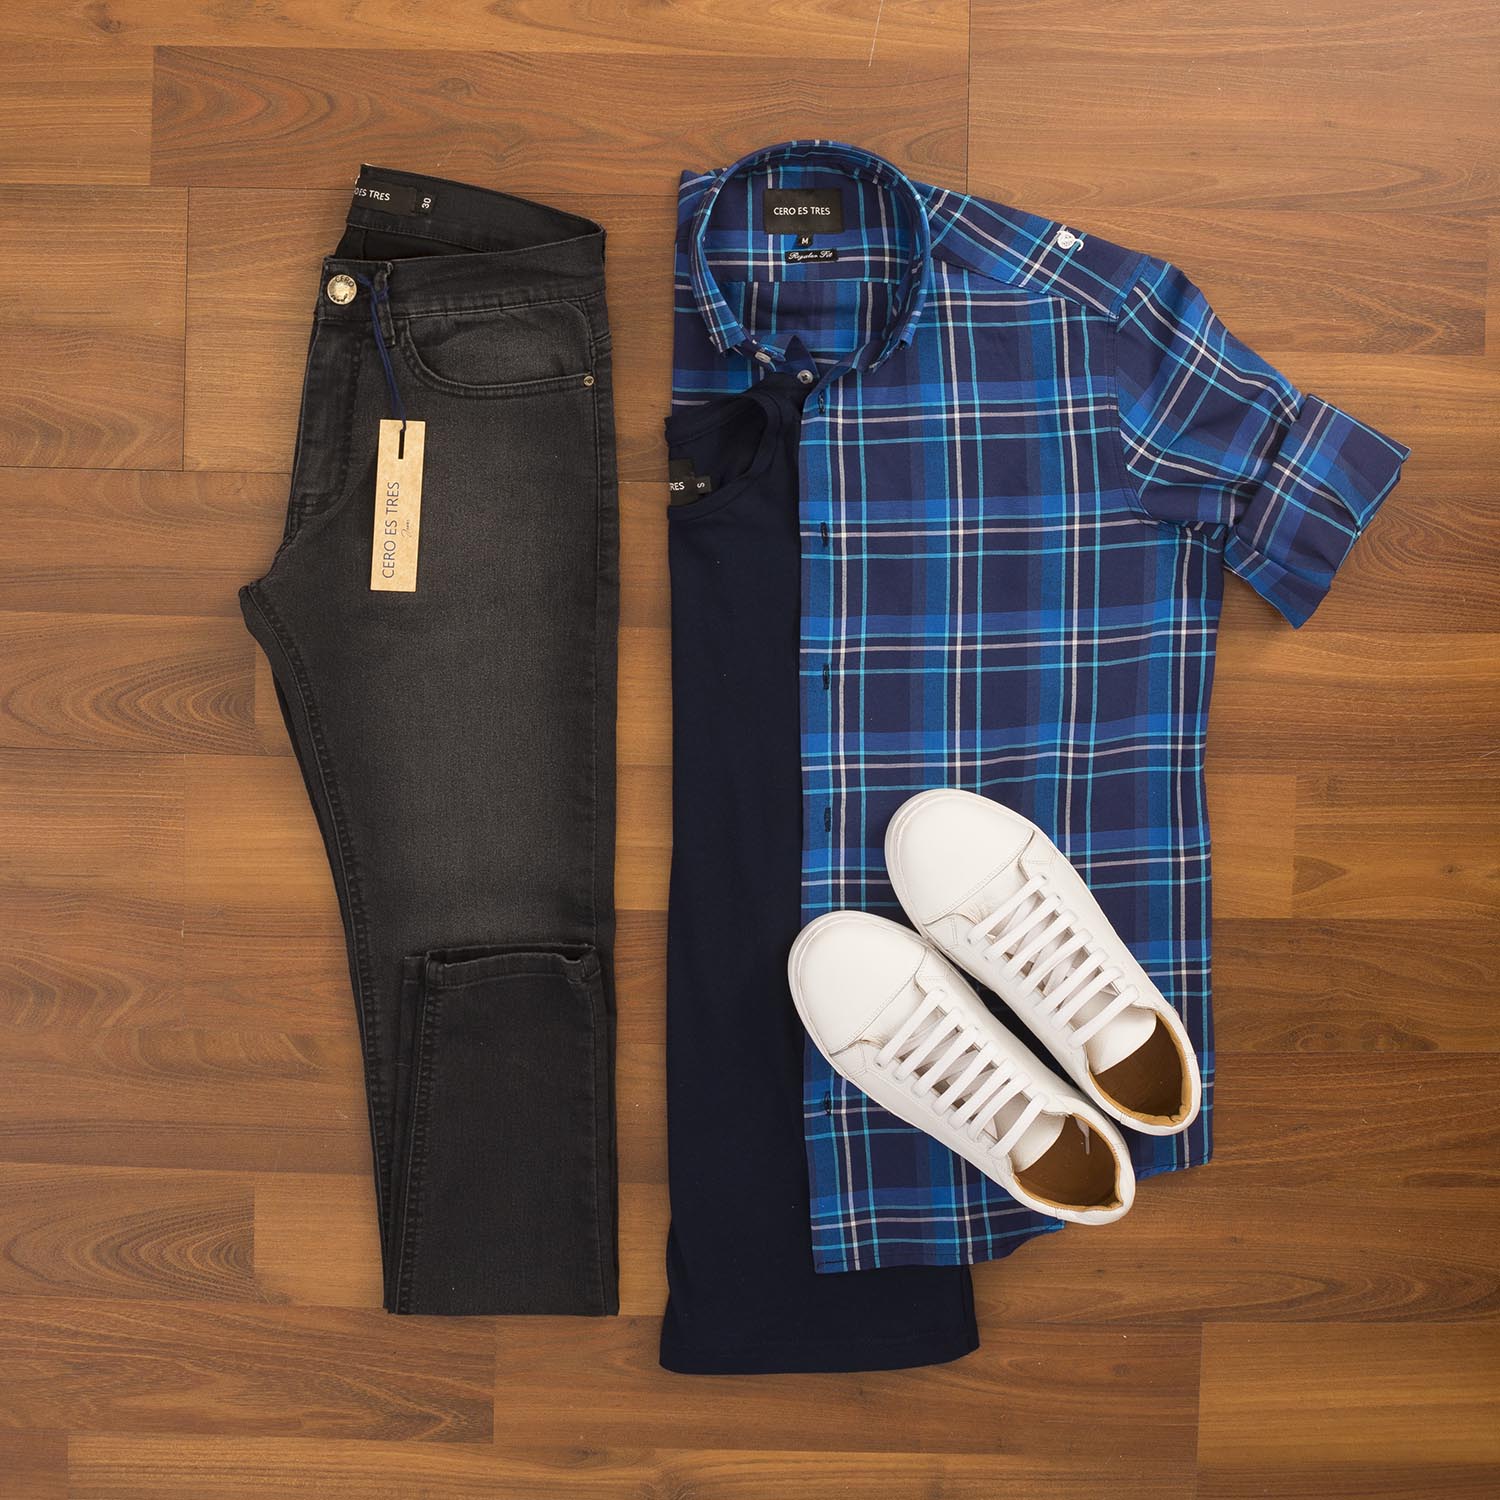 OUTFIT CERO 205